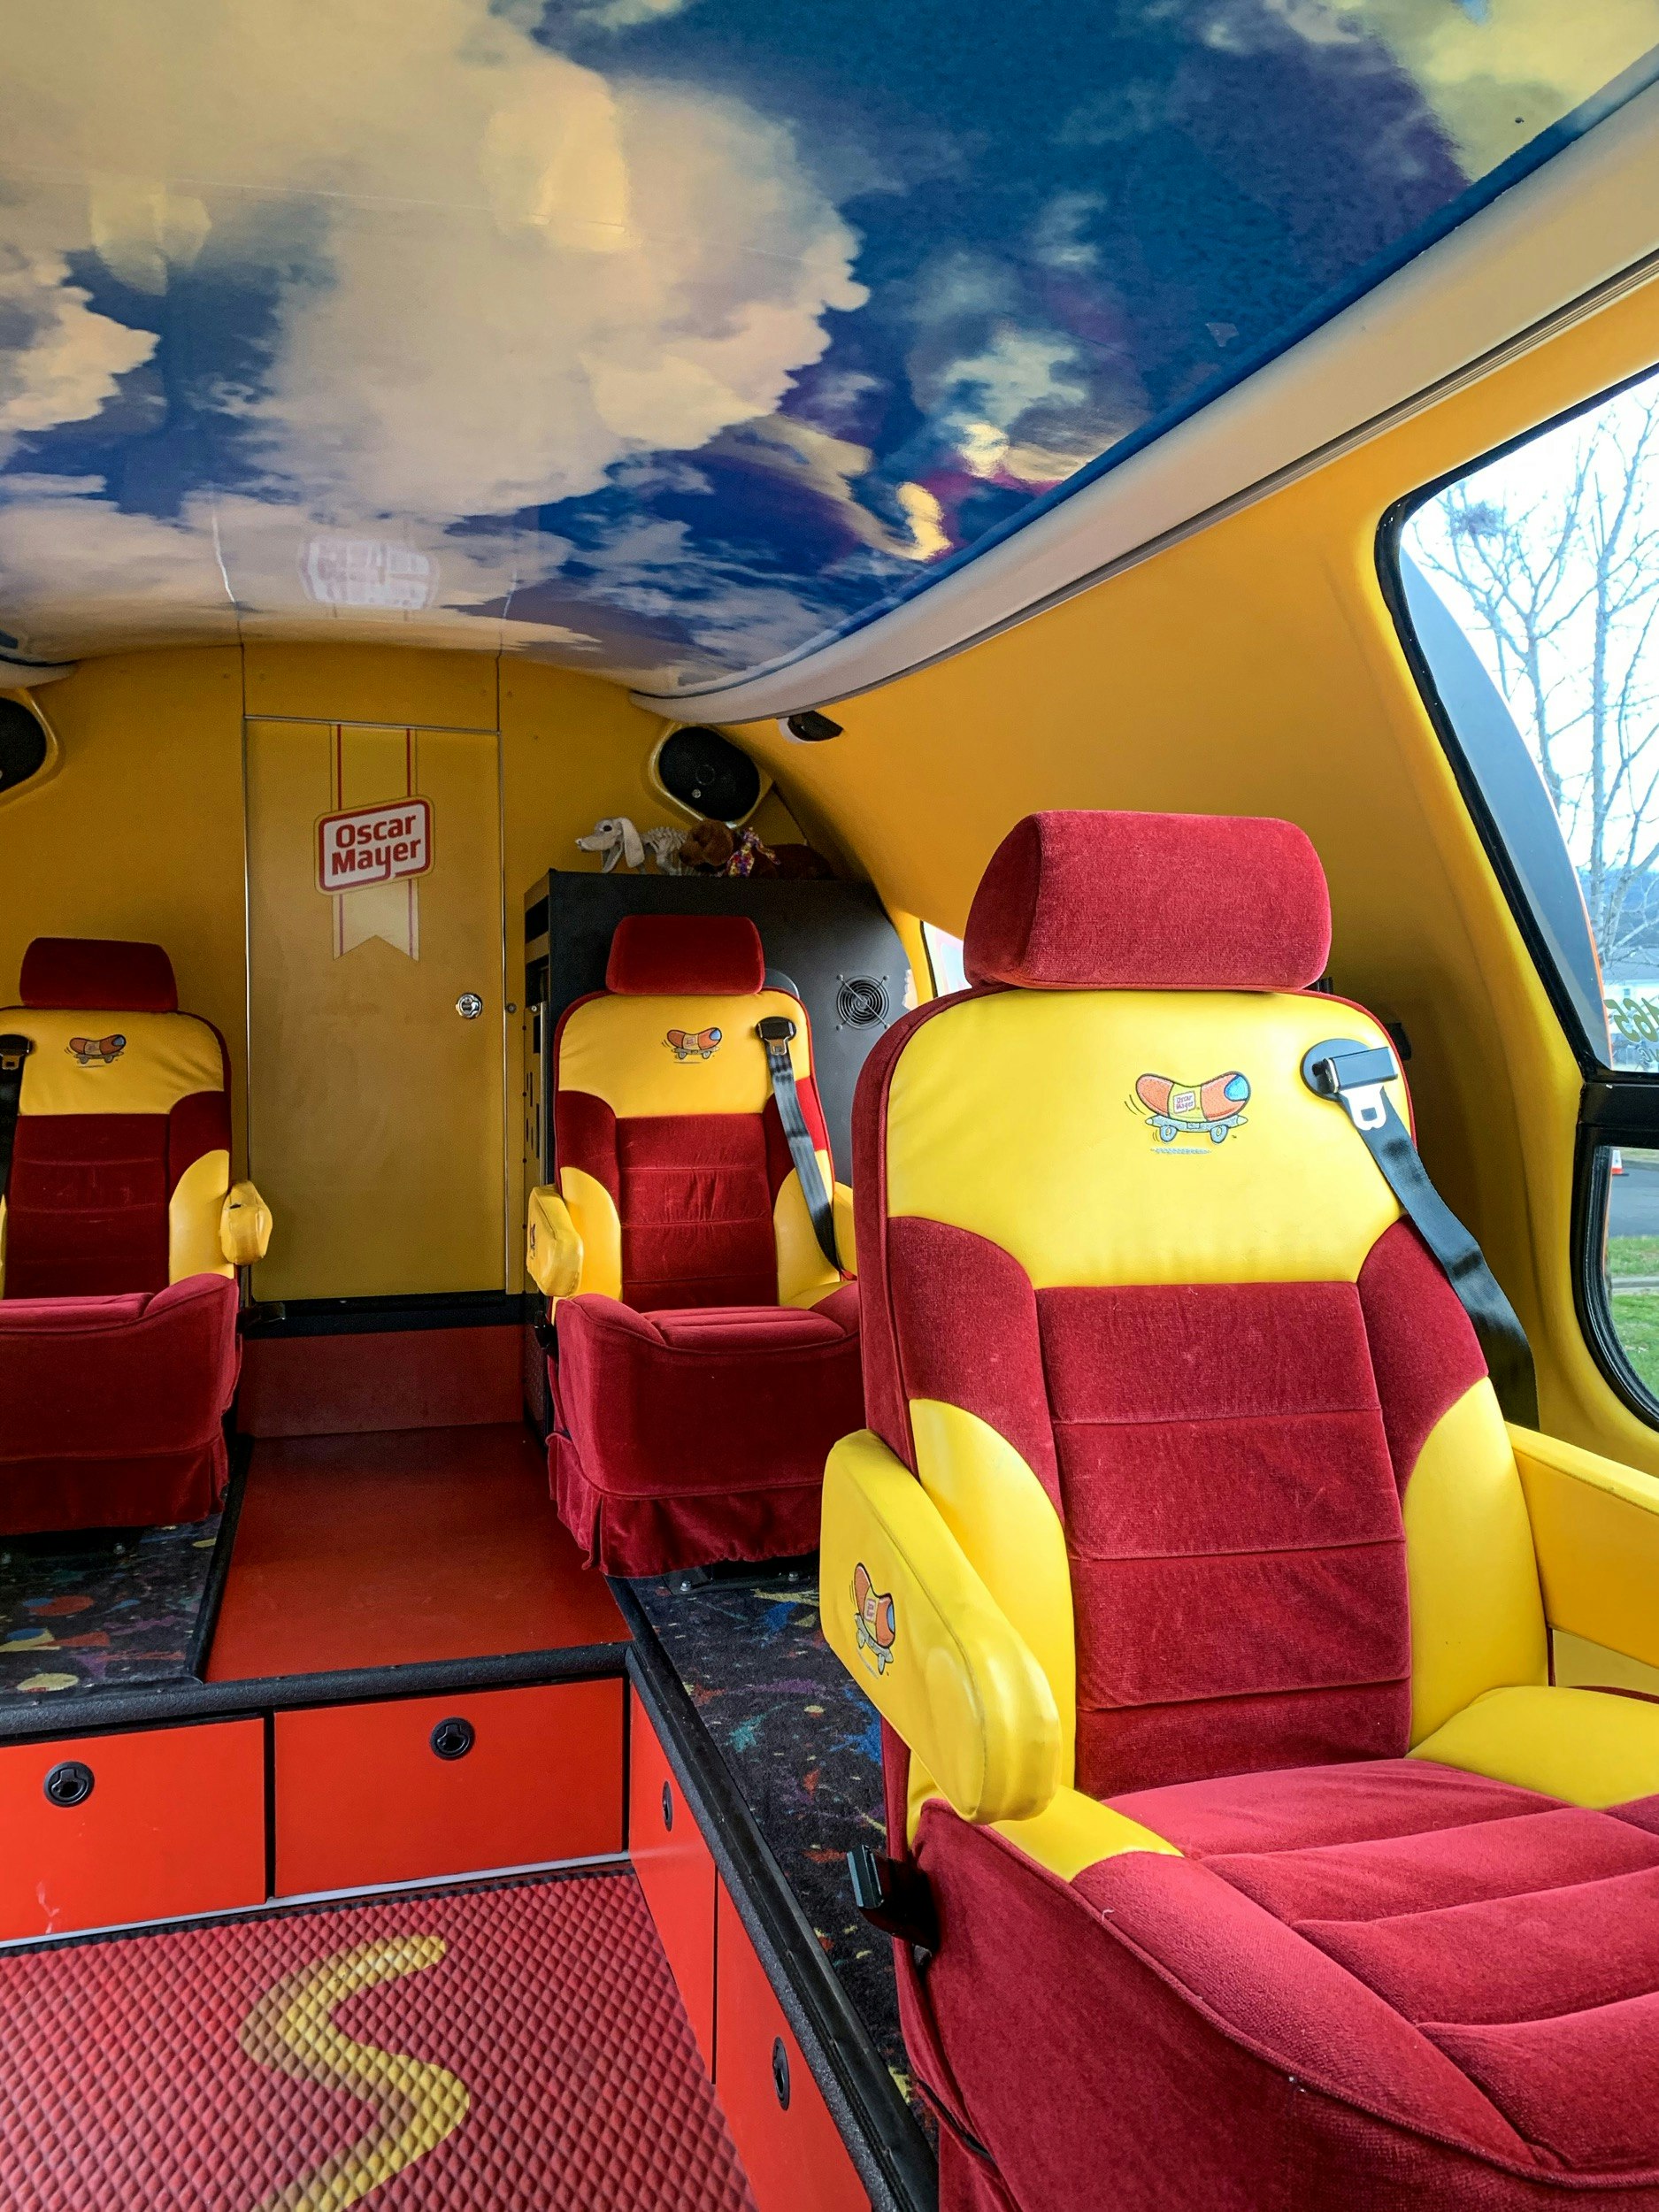 The inside of the Oscar Mayer Wienermobile has bright yellow and red upholstery